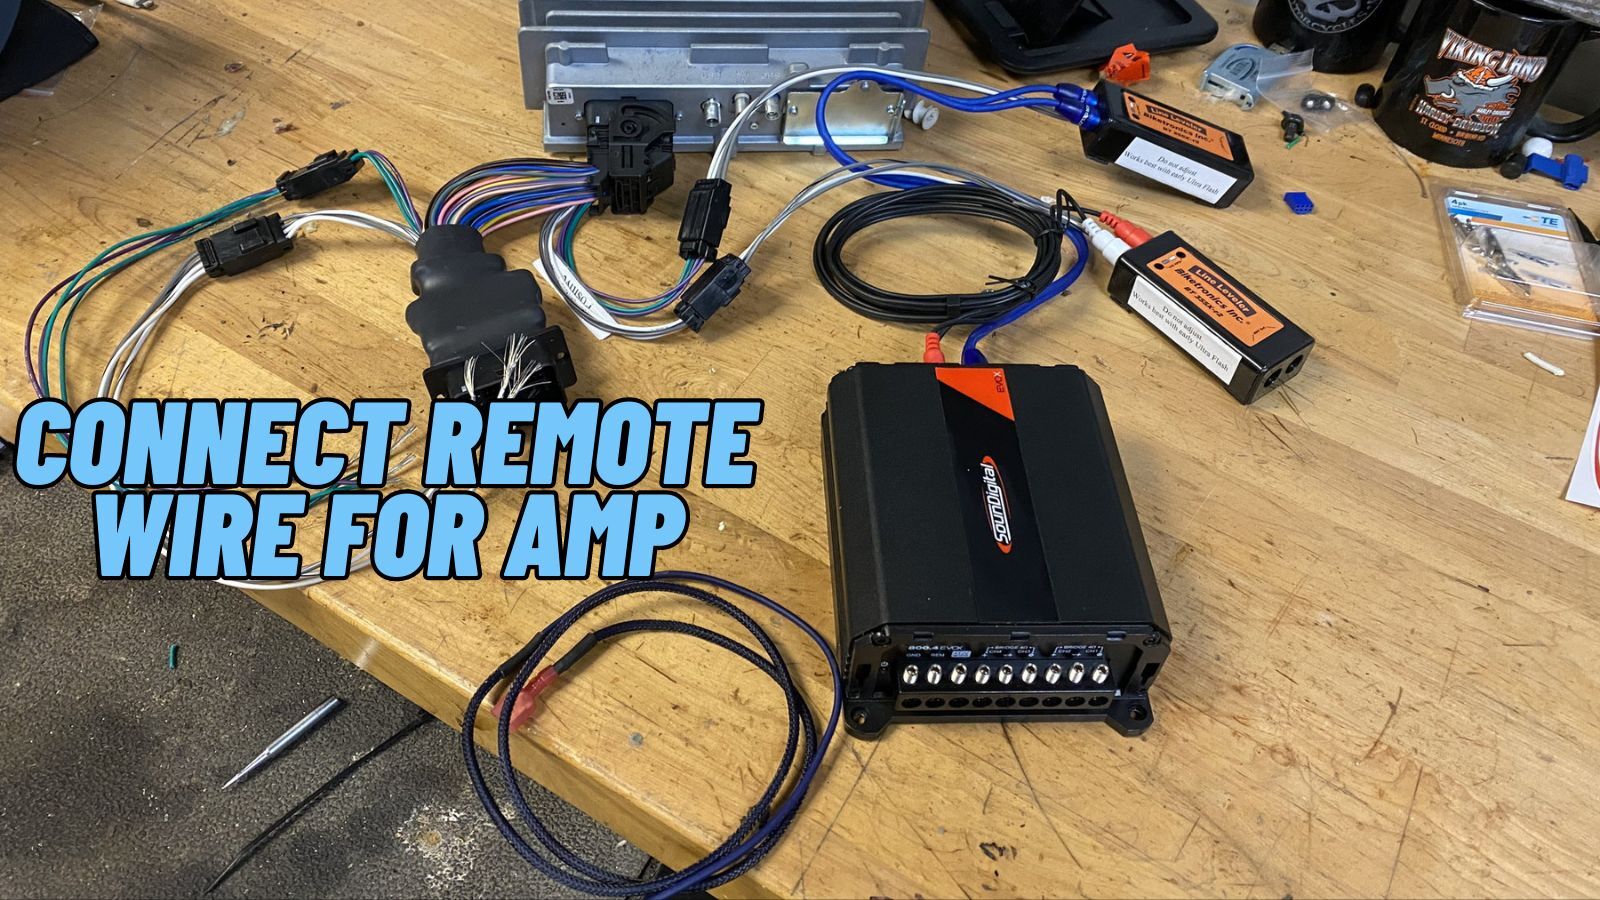 Where to Connect Remote Wire for Amp? (5 Options)